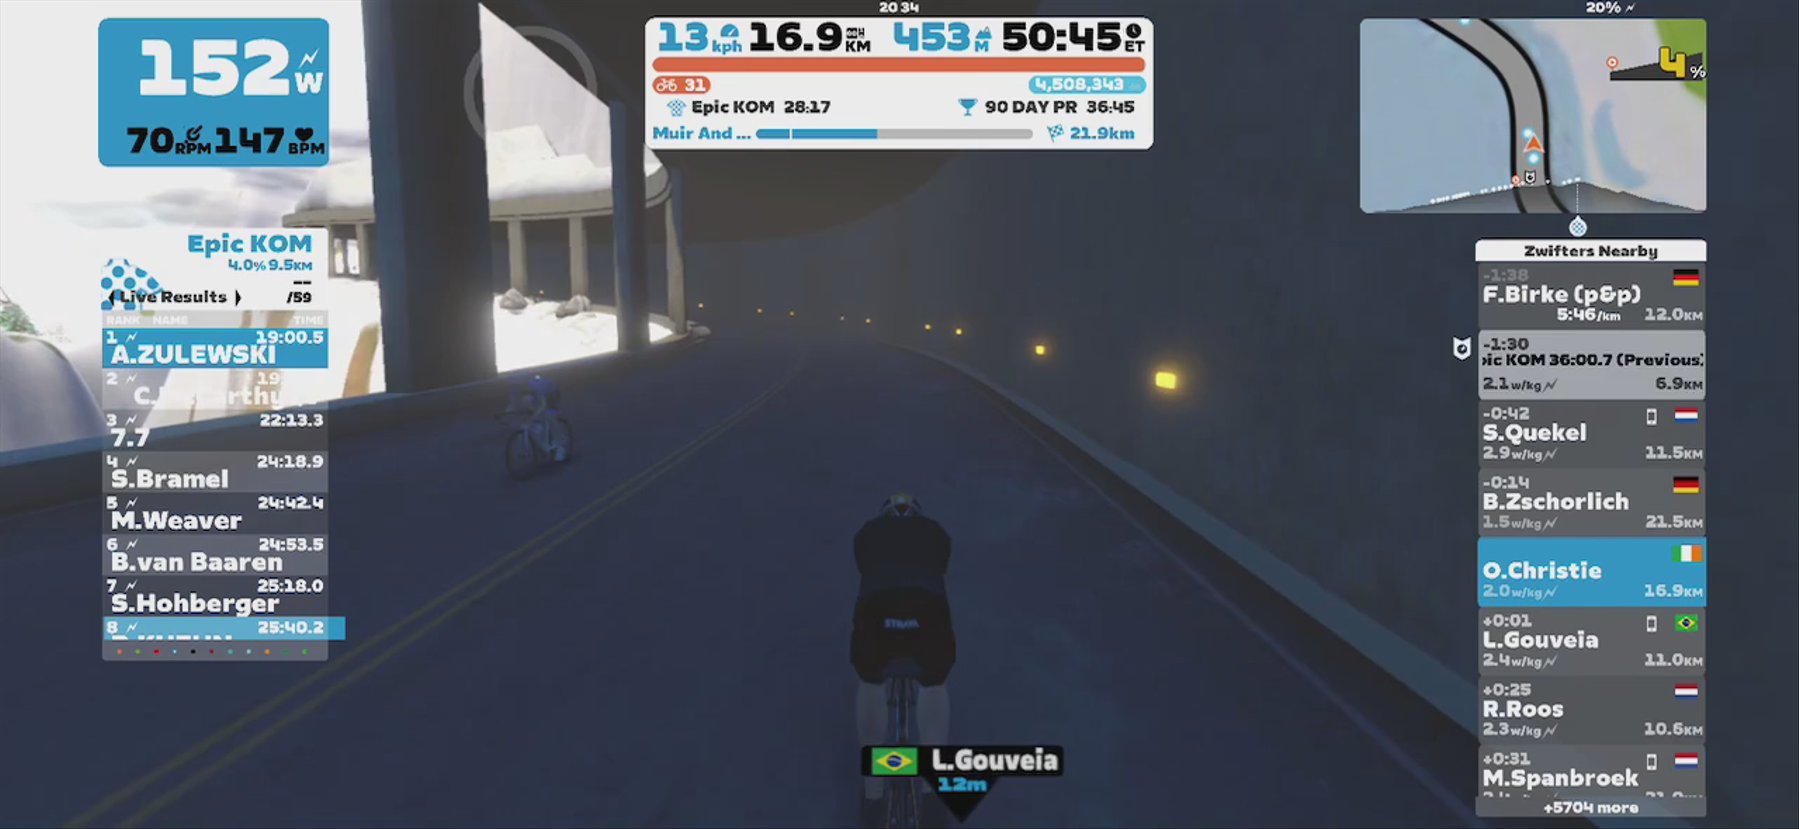 Zwift - Muir And The Mountain in Watopia